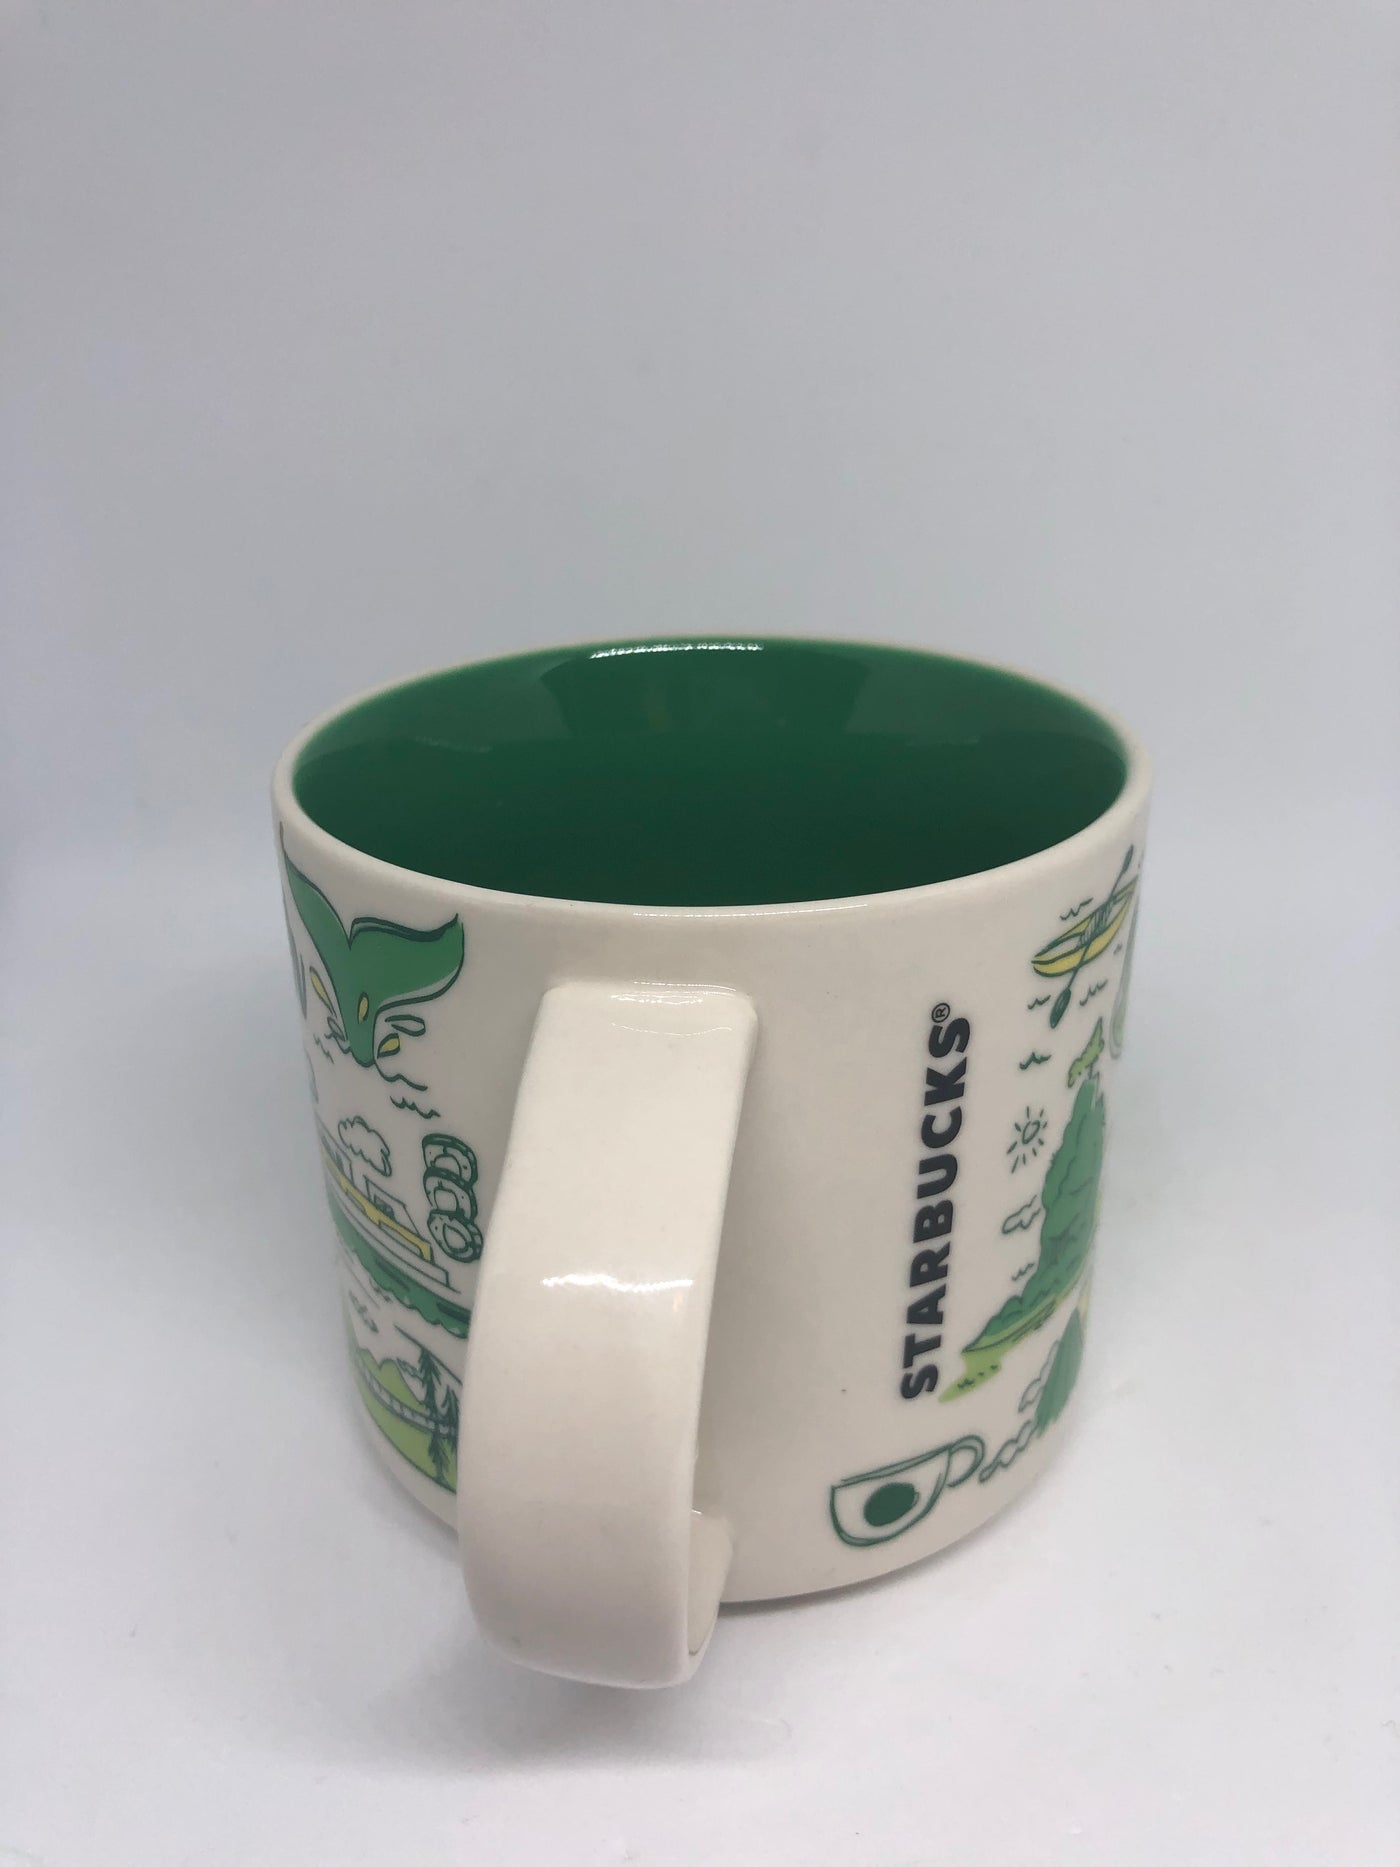 Starbucks Been There Series Collection Vancouver Ceramic Coffee Mug New with Box